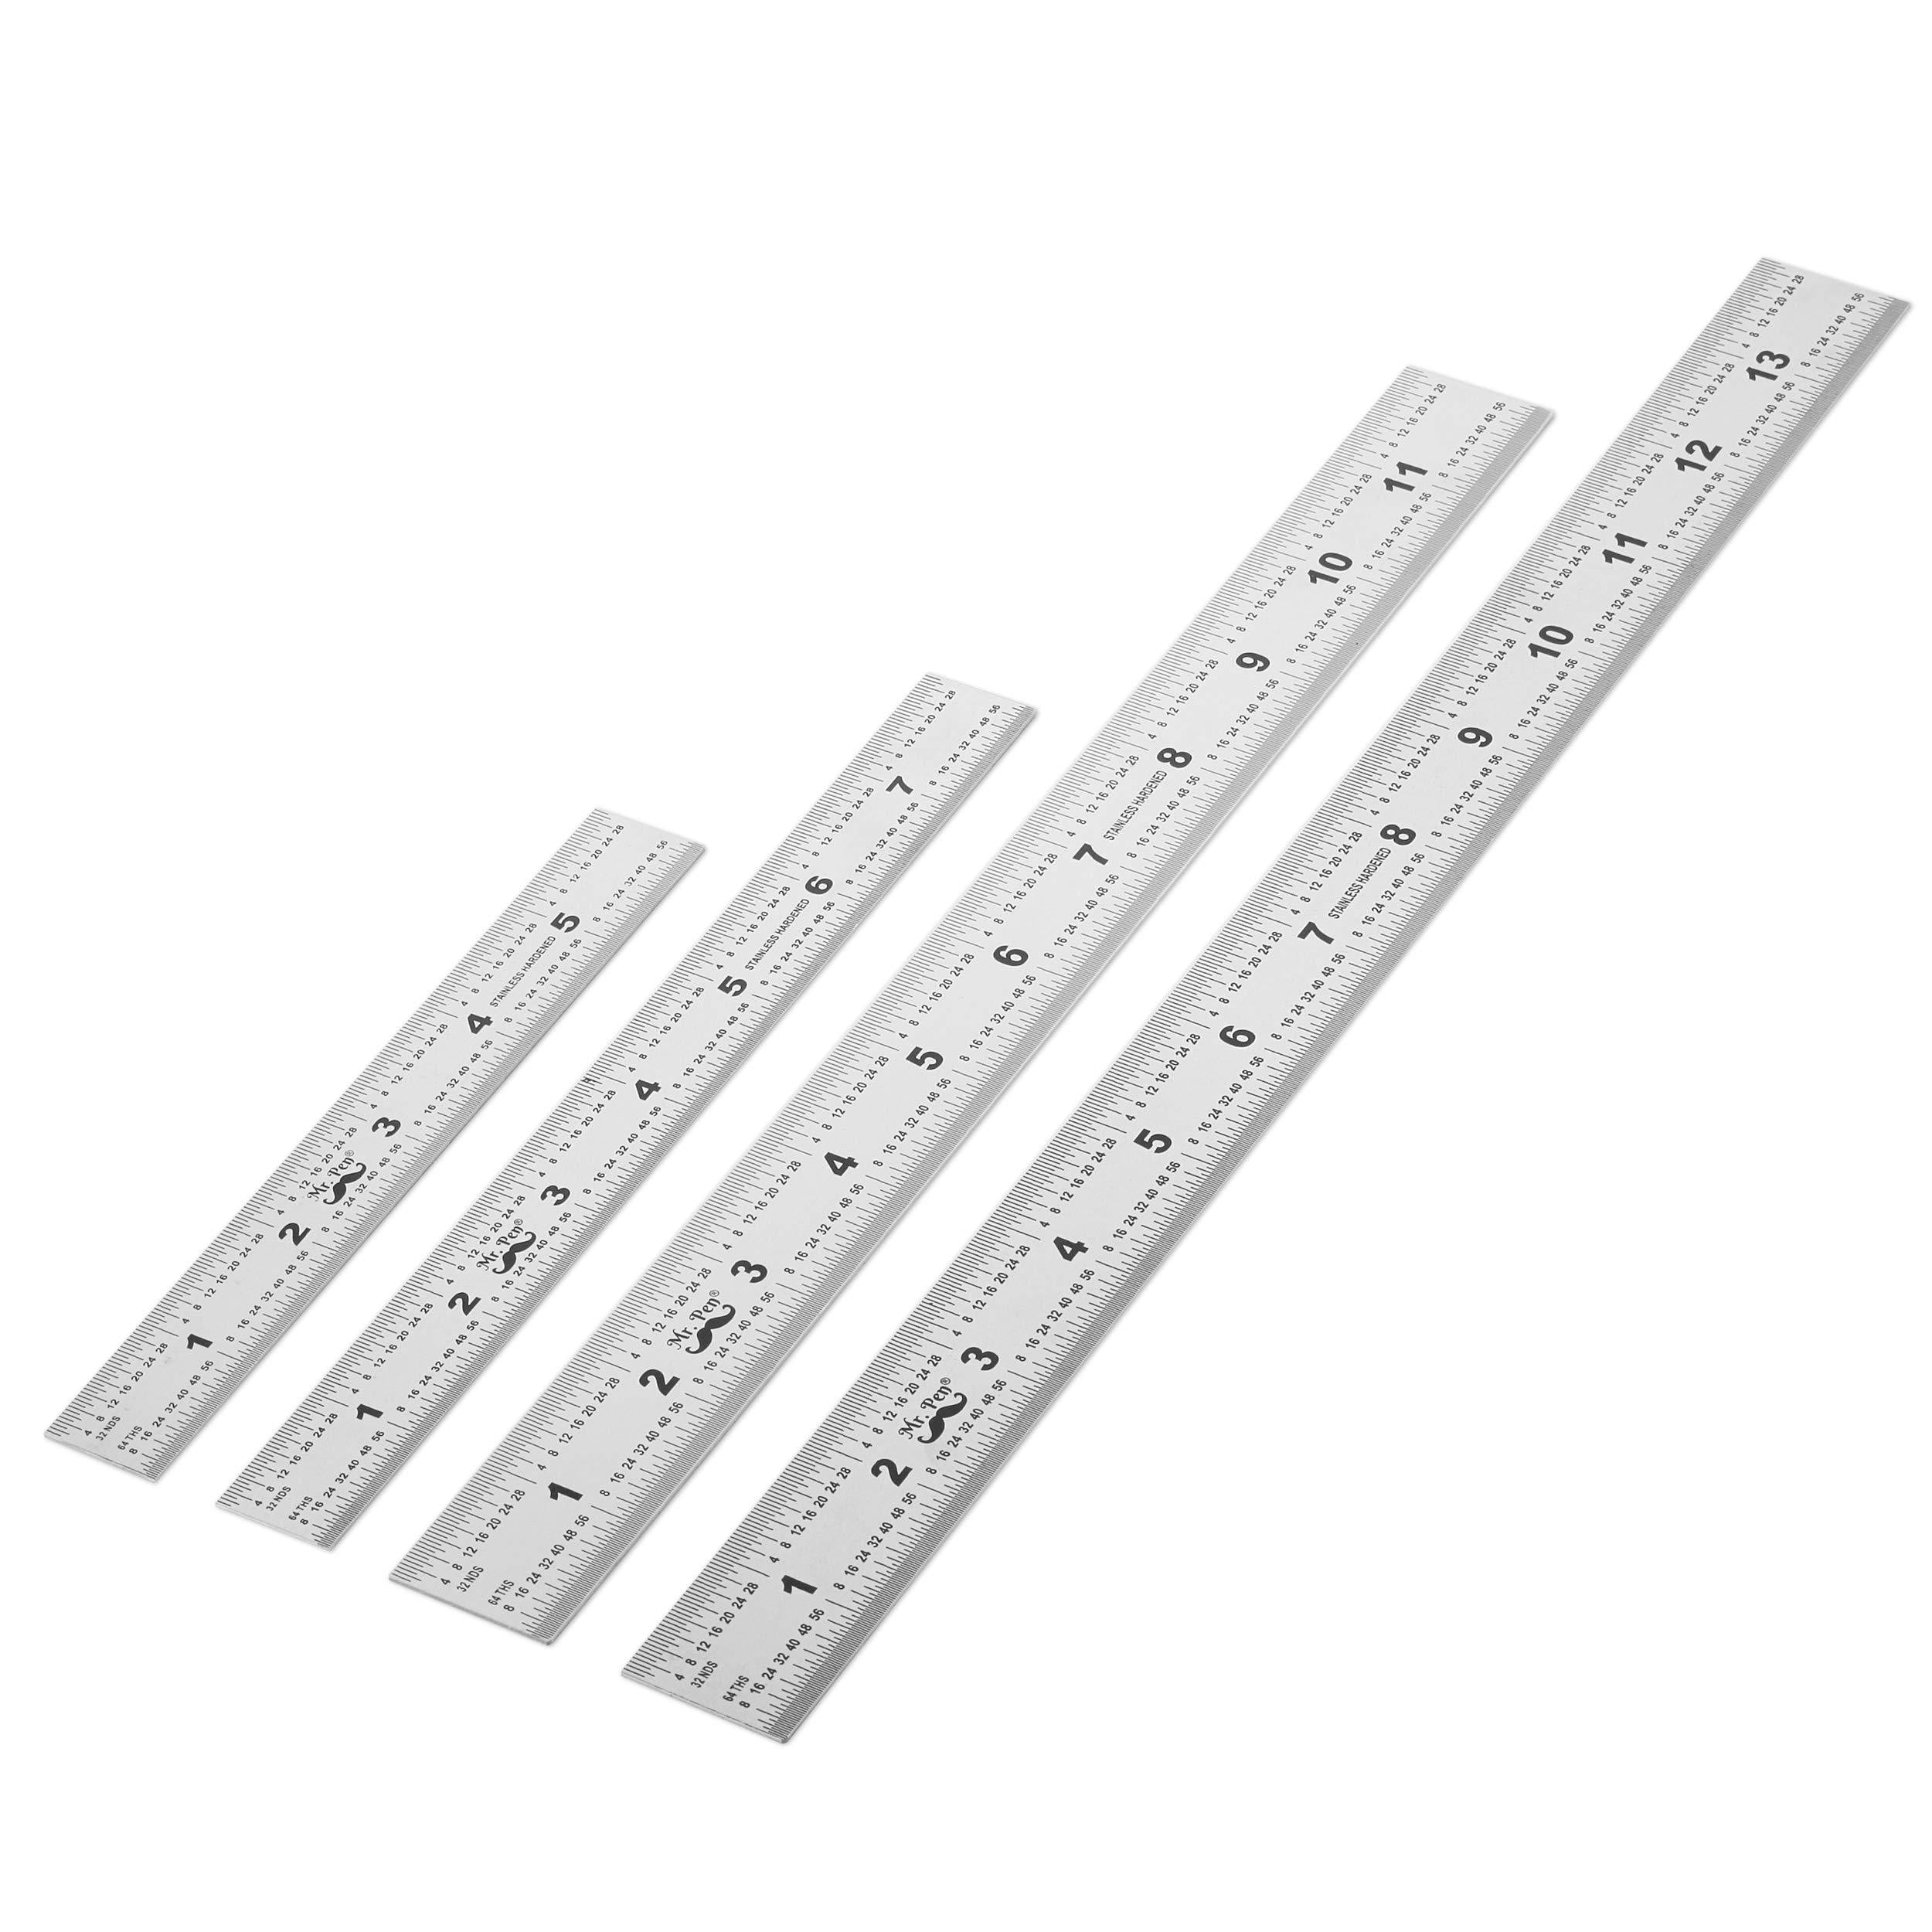 Stainless Steel Rulers, 6, 8, 12, 16, 20 inch Metal Rulers, with